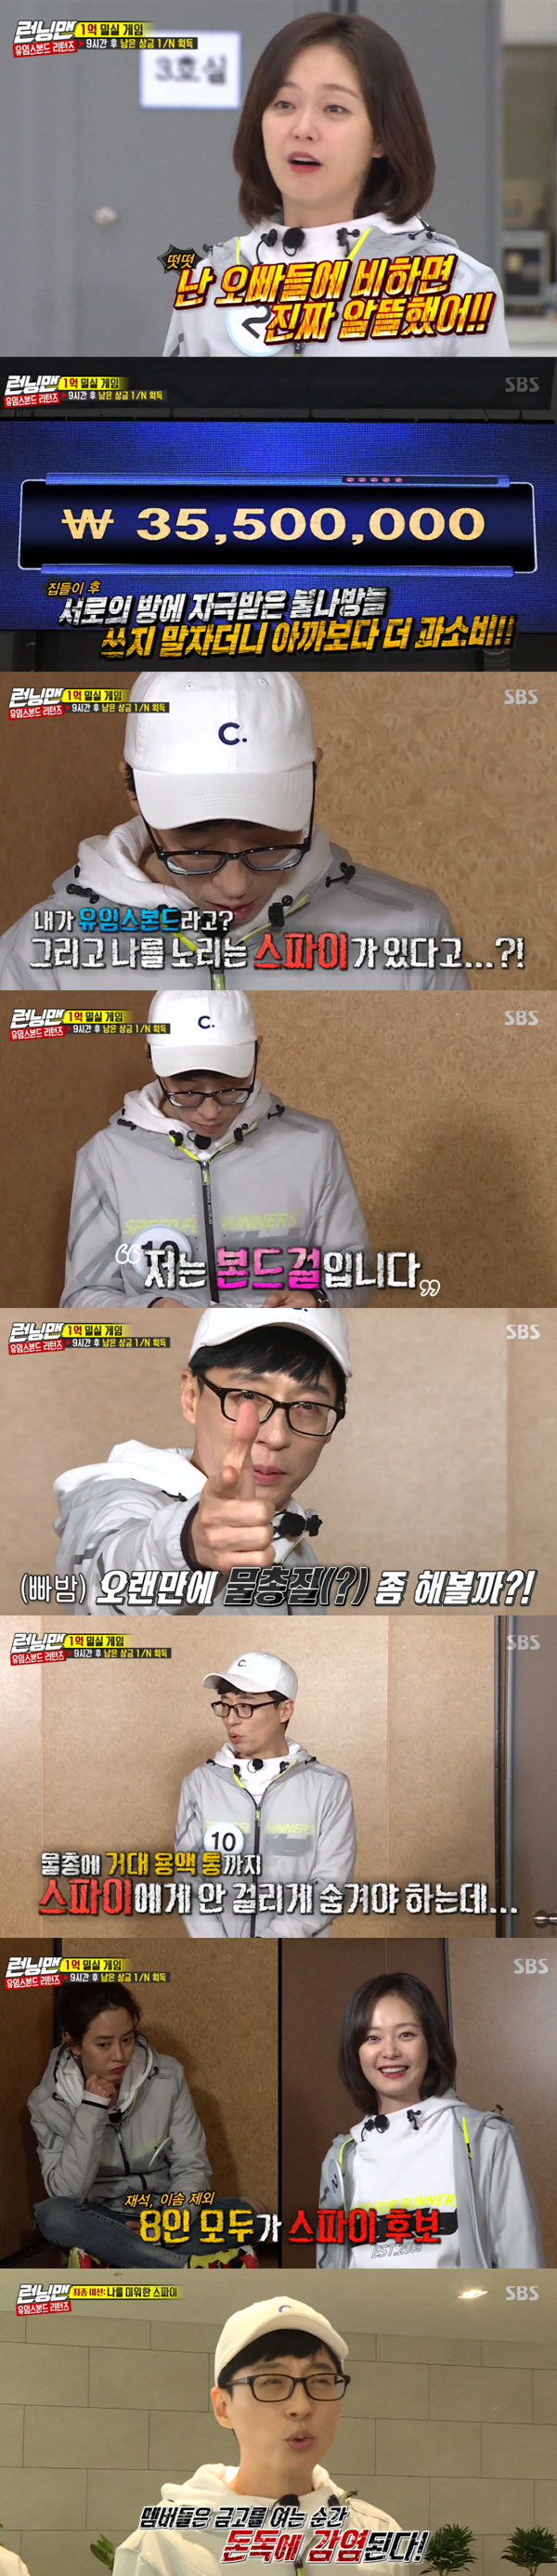 Running Man was also a Yumes Bond.Shin Ha-kyun, Esom and Kim Kyung-nam appeared as guests on SBS Running Man broadcast on the 28th, and 100 million secret room game race was held.The production team introduced the new race, which is divided into 1/N after saving 100 million won for nine hours. If you dont spend a penny for nine hours, you will get 10 million won per person.However, it is prohibited to possess personal items. You can purchase the necessary items by interphone in the container.Lee Kwang-soo smiled brightly at the words that the individual spending amount was all private.The door was opened every hour, and the members started to consume storms such as jjajangmyeon, cup noodles, rice, quilts, chairs, and deodorants.The members were surprised at the amount of the decrease, and the members were surprised at Lee Kwang-soos room, which was covered with blankets, unlike the somewhat small Jeon So-mins room.Meanwhile, Yoo Jae-Suk identified a questionable note earlier handed over by Esom, where he said: You are a Yumes Bond, there is a Spy aiming for you.Im Bond Girl, it said.Earlier, the crew told Esom that Yoo Jae-Suk was a Yumes Bond secretly Spy and explained that you could have Spy in-N-Out Burger before Yoo Jae-Suk In-N-Out Burger.Baro Yoo Jae-Suk bought water guns and molten medicine for the Yumes Bond activity.The nine-hour solitary life ended, and the members won a quarter of the final prize money balance.In particular, the members will find the safe with their name attached to the last mission and then find the safe of the host S to acquire the amount collected.Yoo Jae-Suk and Esom were given secret orders by the crew; the members are infected by the Dondog the moment they open the safe.However, Yoo Jae-Suk can be treated by shooting a water gun vaccine on the name tag of a member who has been in Dondog.However, even one person is infected in Dondog, and the race ends when In-N-Out Burger or By Spy, Uims Bond is in-N-Out Burger.Yang Se-chan, Lee Kwang-soo, Ji Seok-jin, and Song Ji-hyo found the safe, so Yoo Jae-Suk vaccinated their name tags, and the members headed to the intensive care unit.Members in the intensive care unit found quail eggs in their hats, and Spys identity was later identified as Lee Kwang-soo.The identity of host S, who identified Lee Kwang-soo as Spy, was Shin Ha-kyun.Shin Ha-kyun suggested that the Kwangsu should create a chance for Park Jae-seok to avenge his brother.Lee Kwang-soo left the treatment room and put quail eggs in the members secretly to get clues to remove Yoo Jae-Suk.Lee Kwang-soo, who later got the hint of breaking eggs in Park Jae-seoks head, went out looking for Baro Yoo Jae-Suk; the two finally facing each other.Yoo Jae-Suk was embarrassed to see Lee Kwang-soo, who had gone to the treatment room earlier, and won the championship by shooting a water gun in the face of Baro Lee Kwang-soo.Shin Ha-kyun, who finally appeared as him, presented the winning Yoo Jae-Suk and Esom with an honorary pure gold card.Lee Kwang-soo, who failed the Spy mission on the other hand, was hit by Shin Ha-kyun for a penalty.